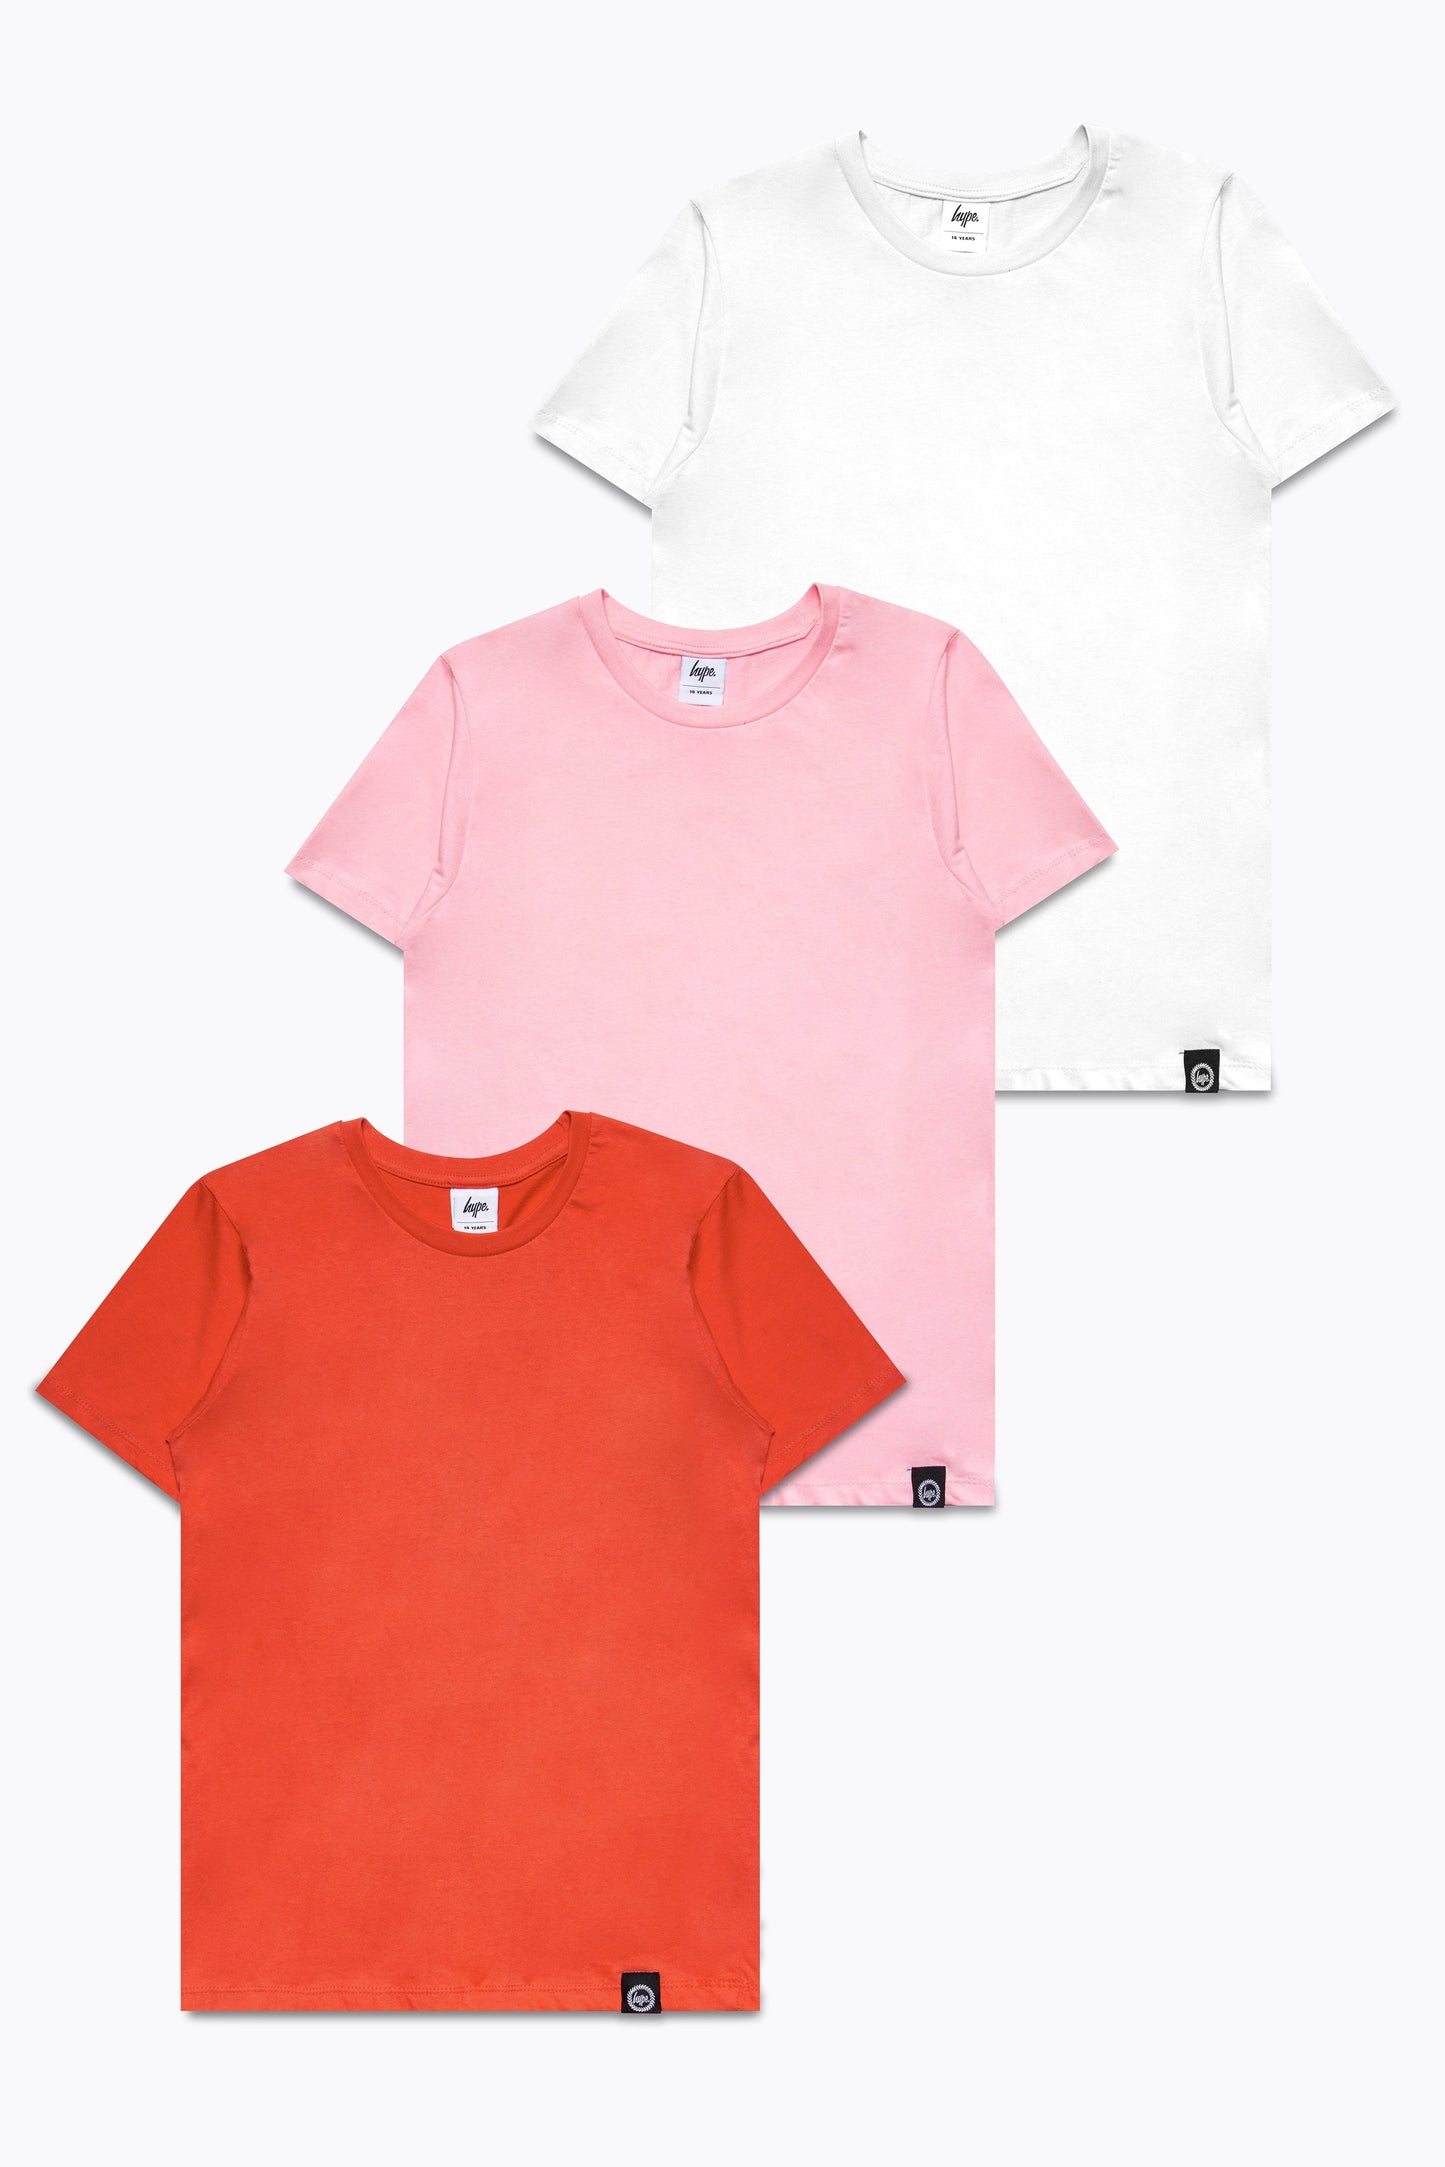 HYPE THREE PACK CORAL & PINK KIDS T-SHIRTS